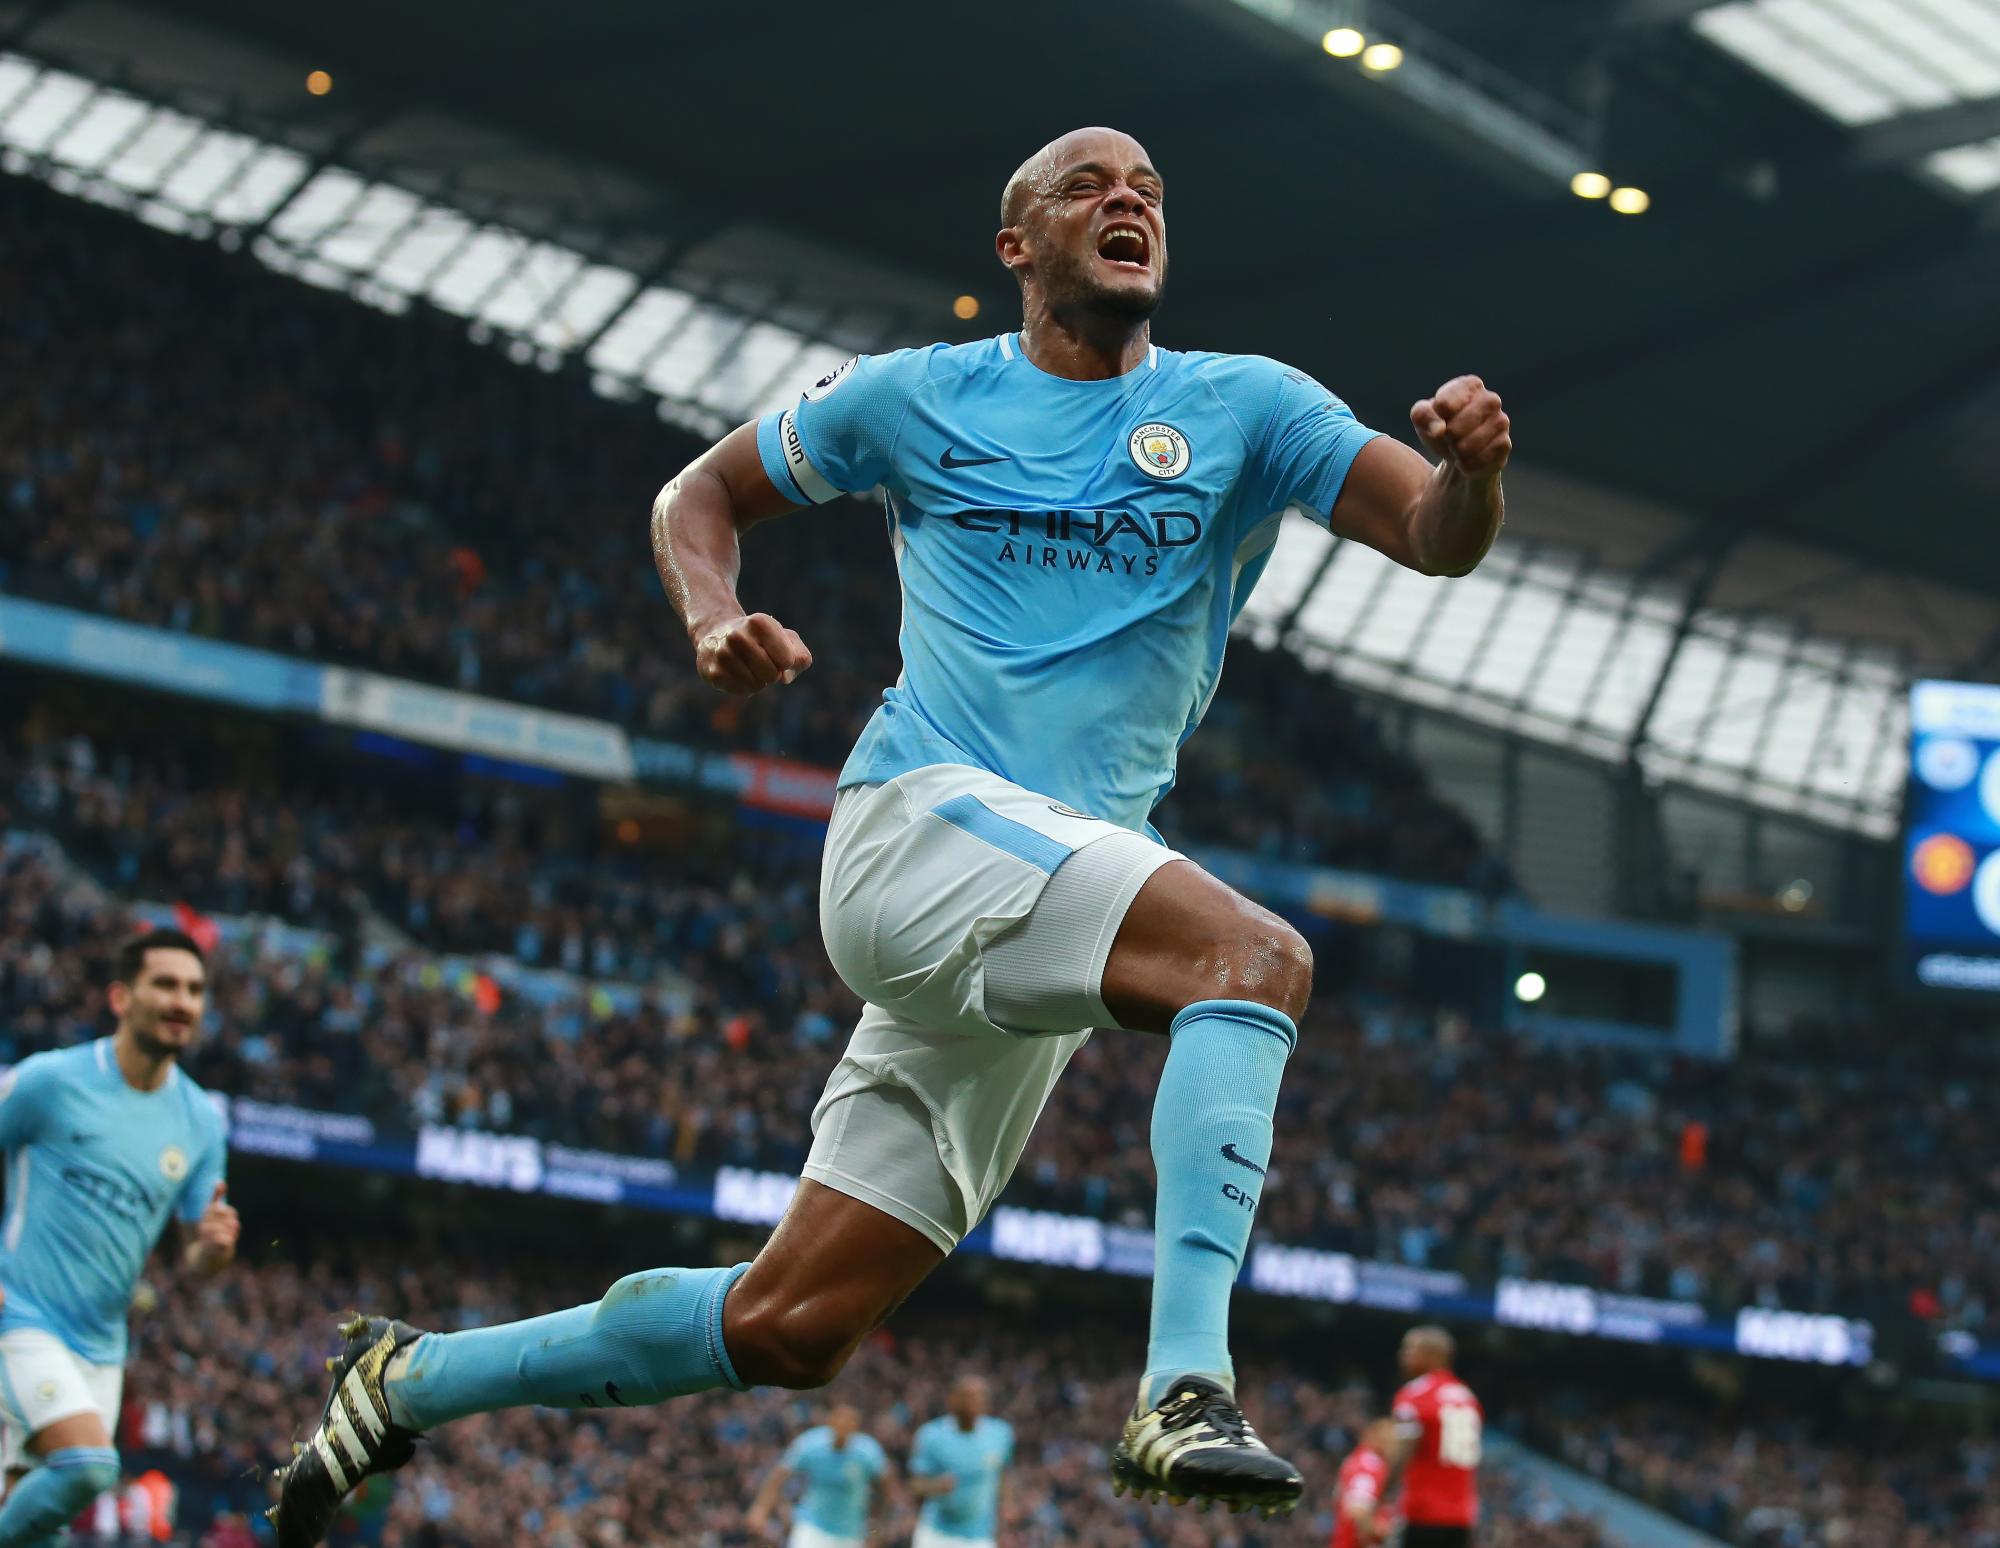 Vincent Kompany S 3 Most Memorable Goals For Manchester City Football Thesportsman